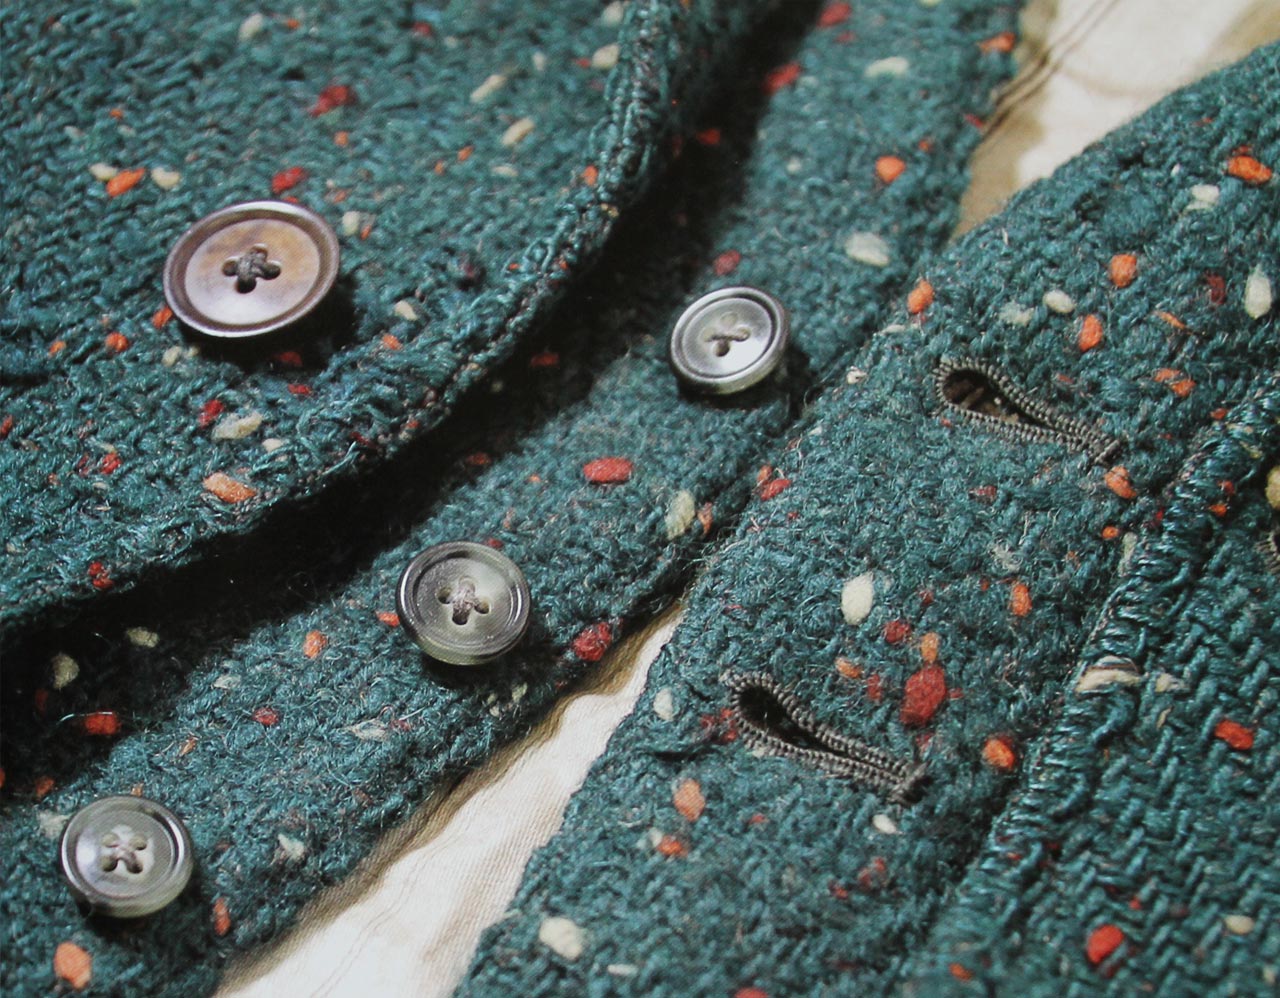 Detail from a Bespoke Tweed Jacket and Waistcoat